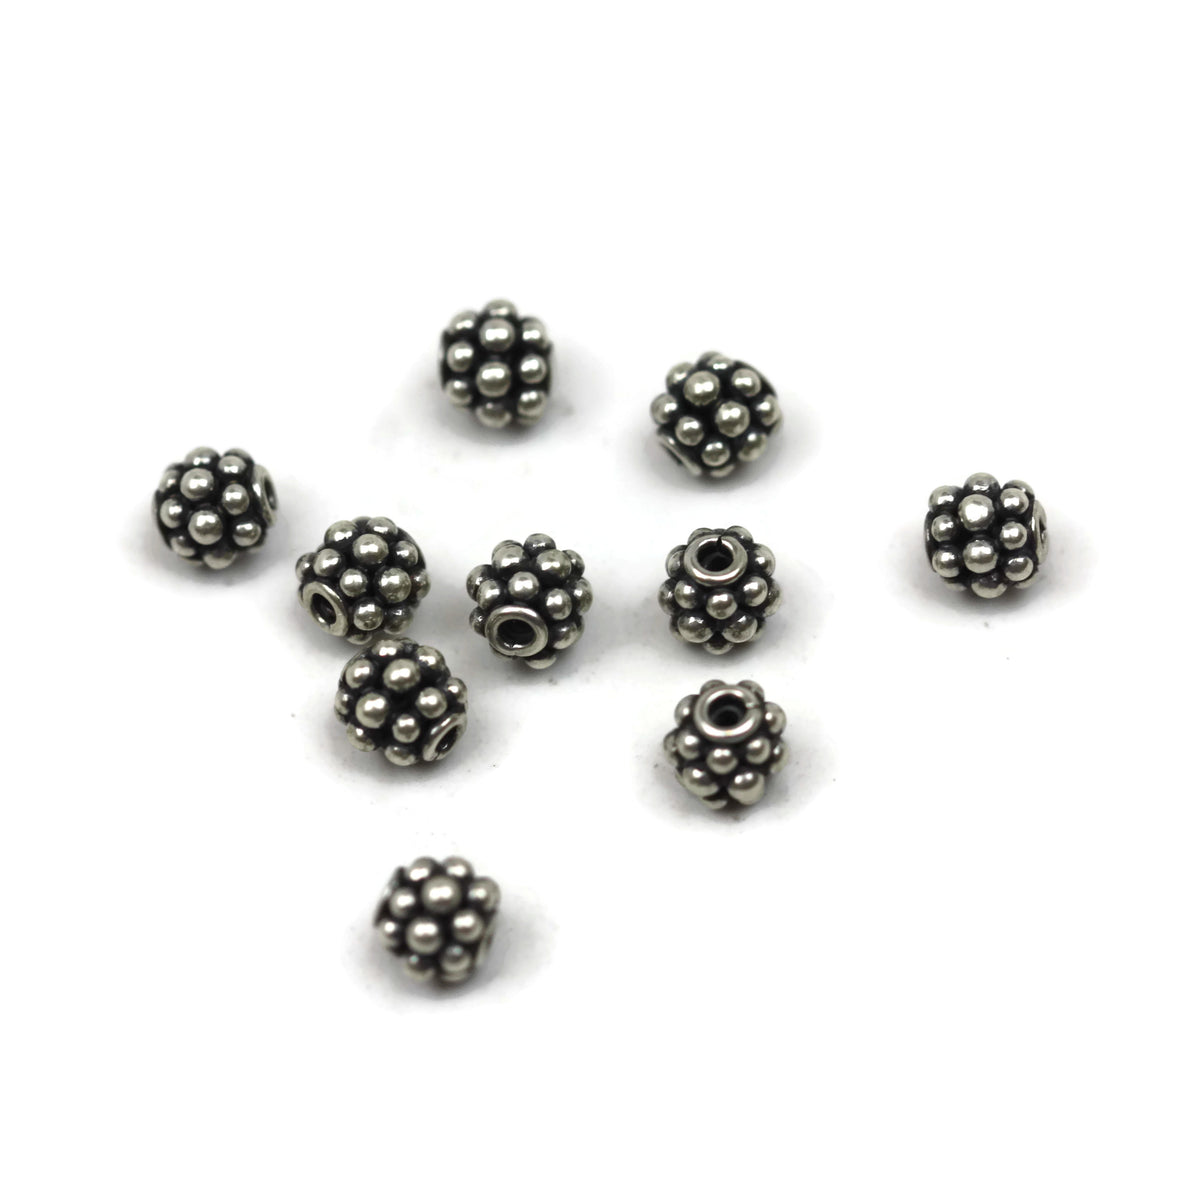 Bali Bead Sterling Silver Round Spacer Bead 5.5 x 6.5mm